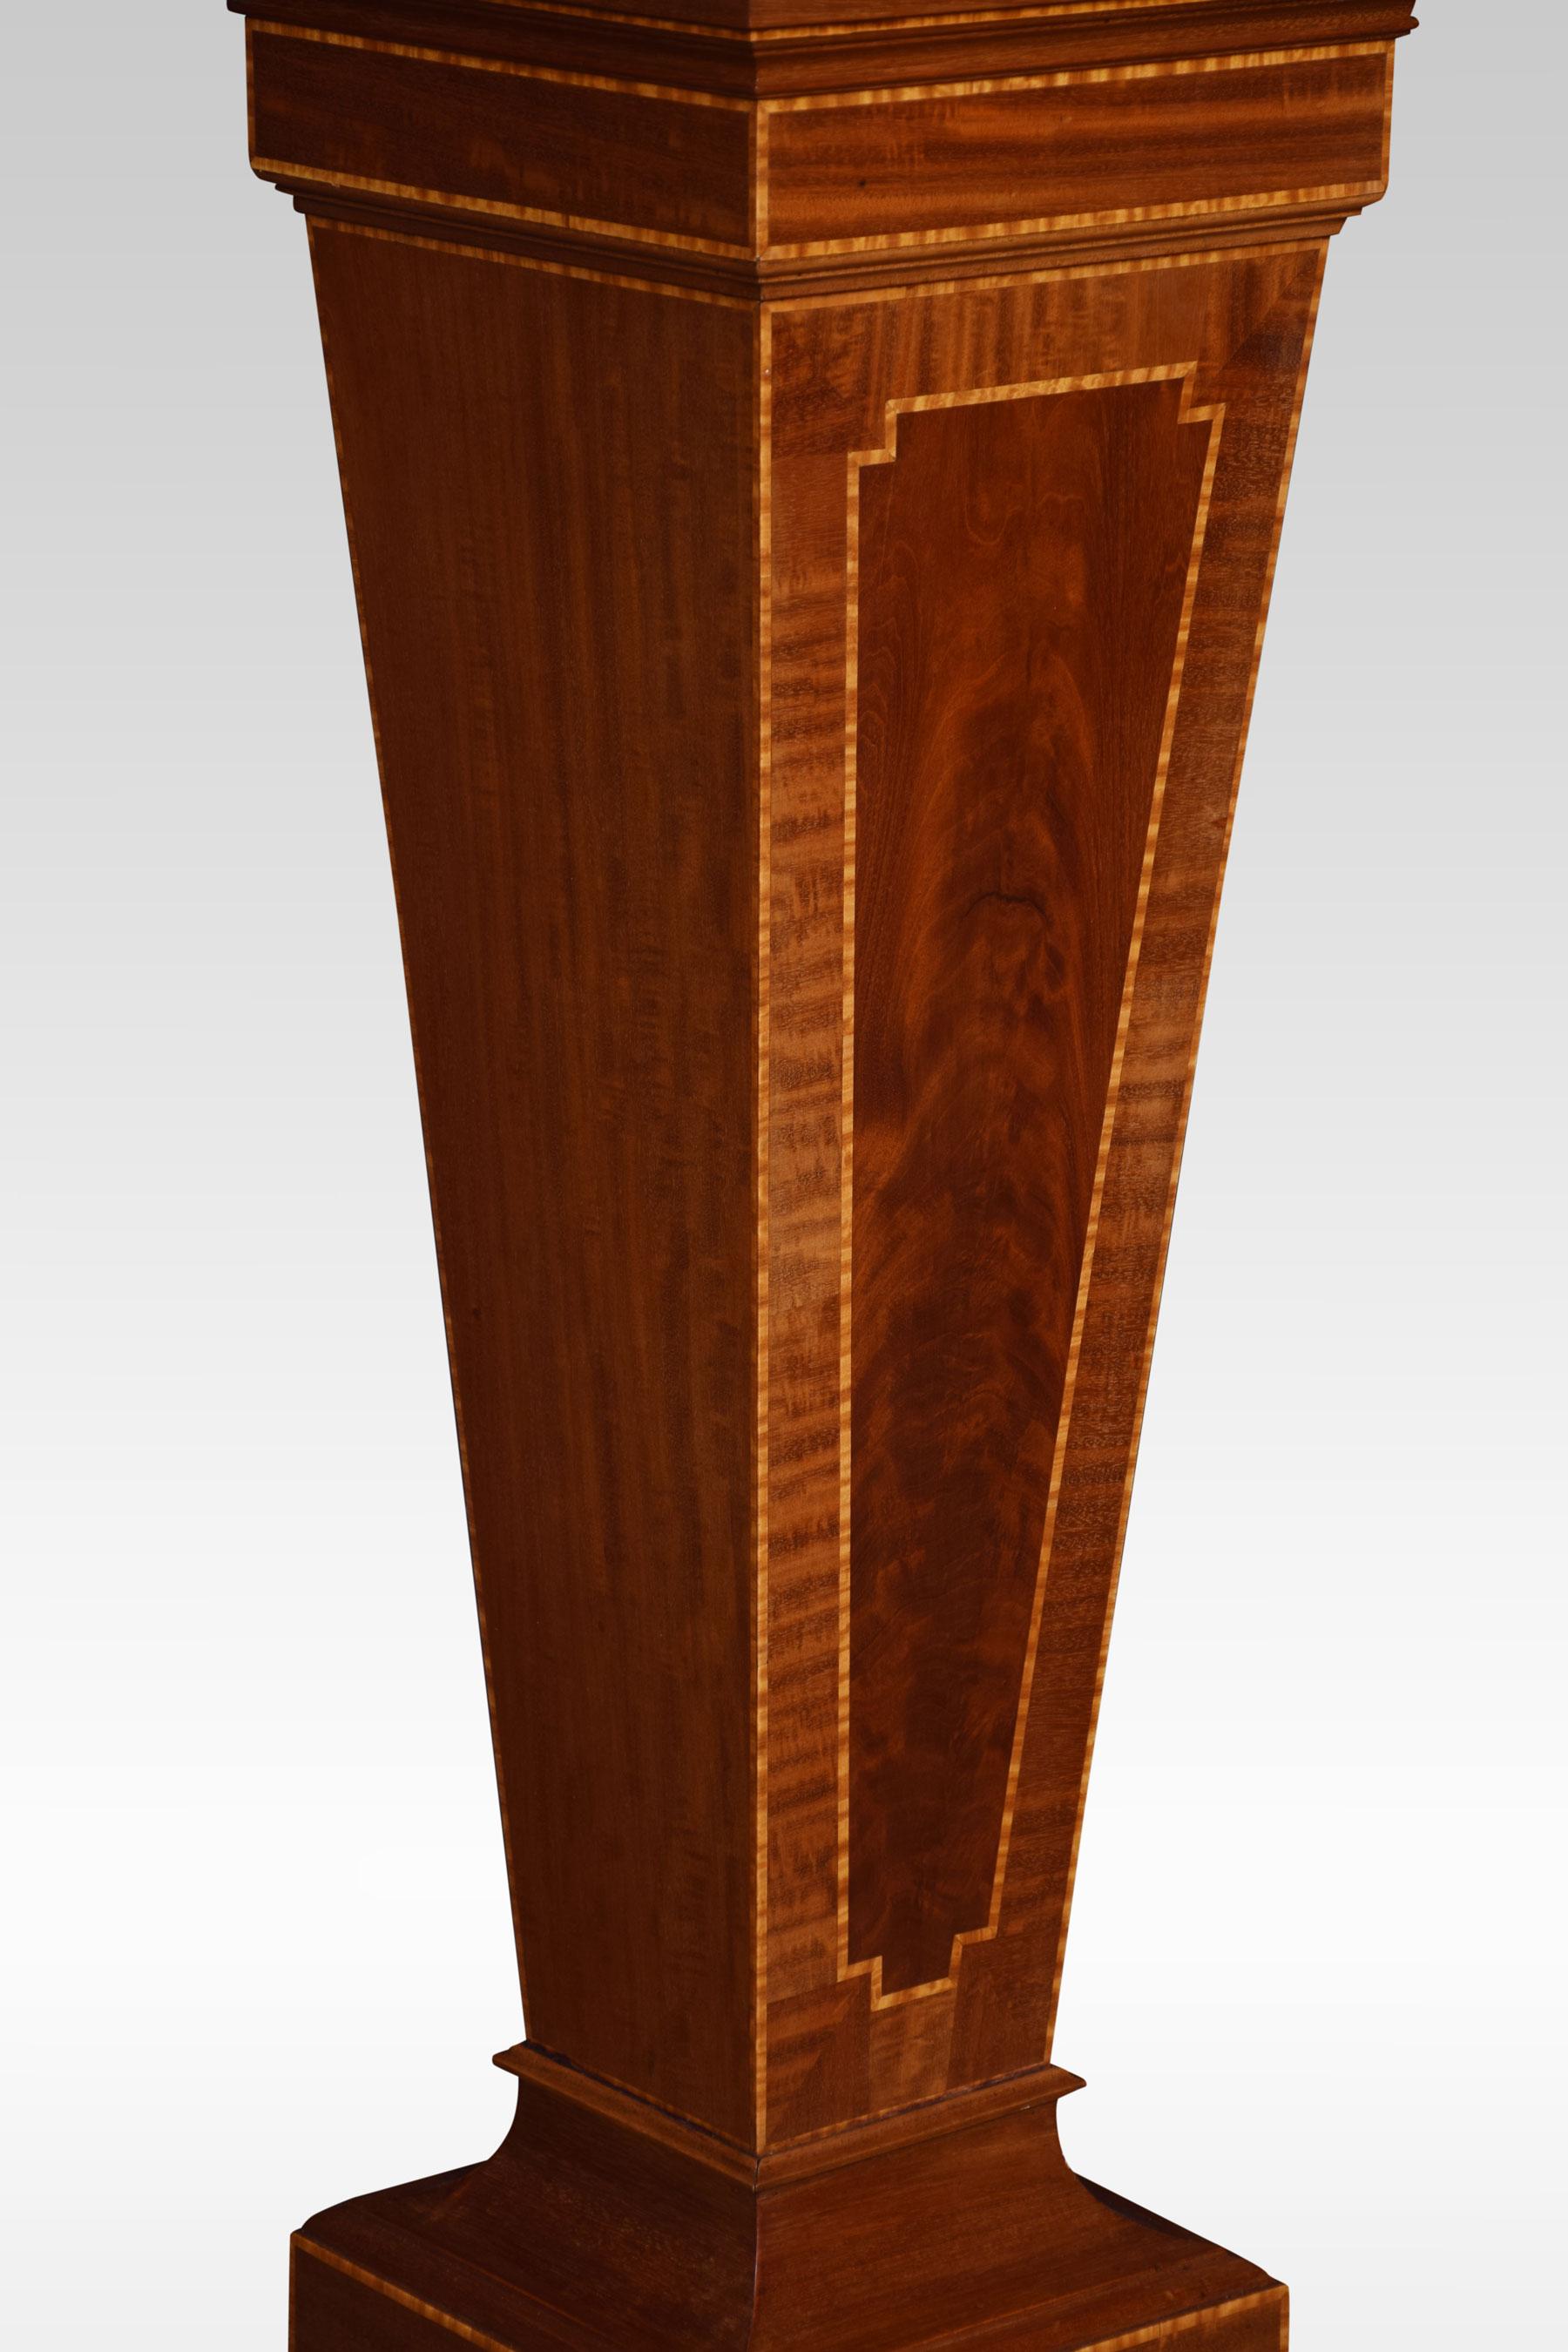 Mahogany Pedestal Torchiere Stand In Good Condition For Sale In Cheshire, GB